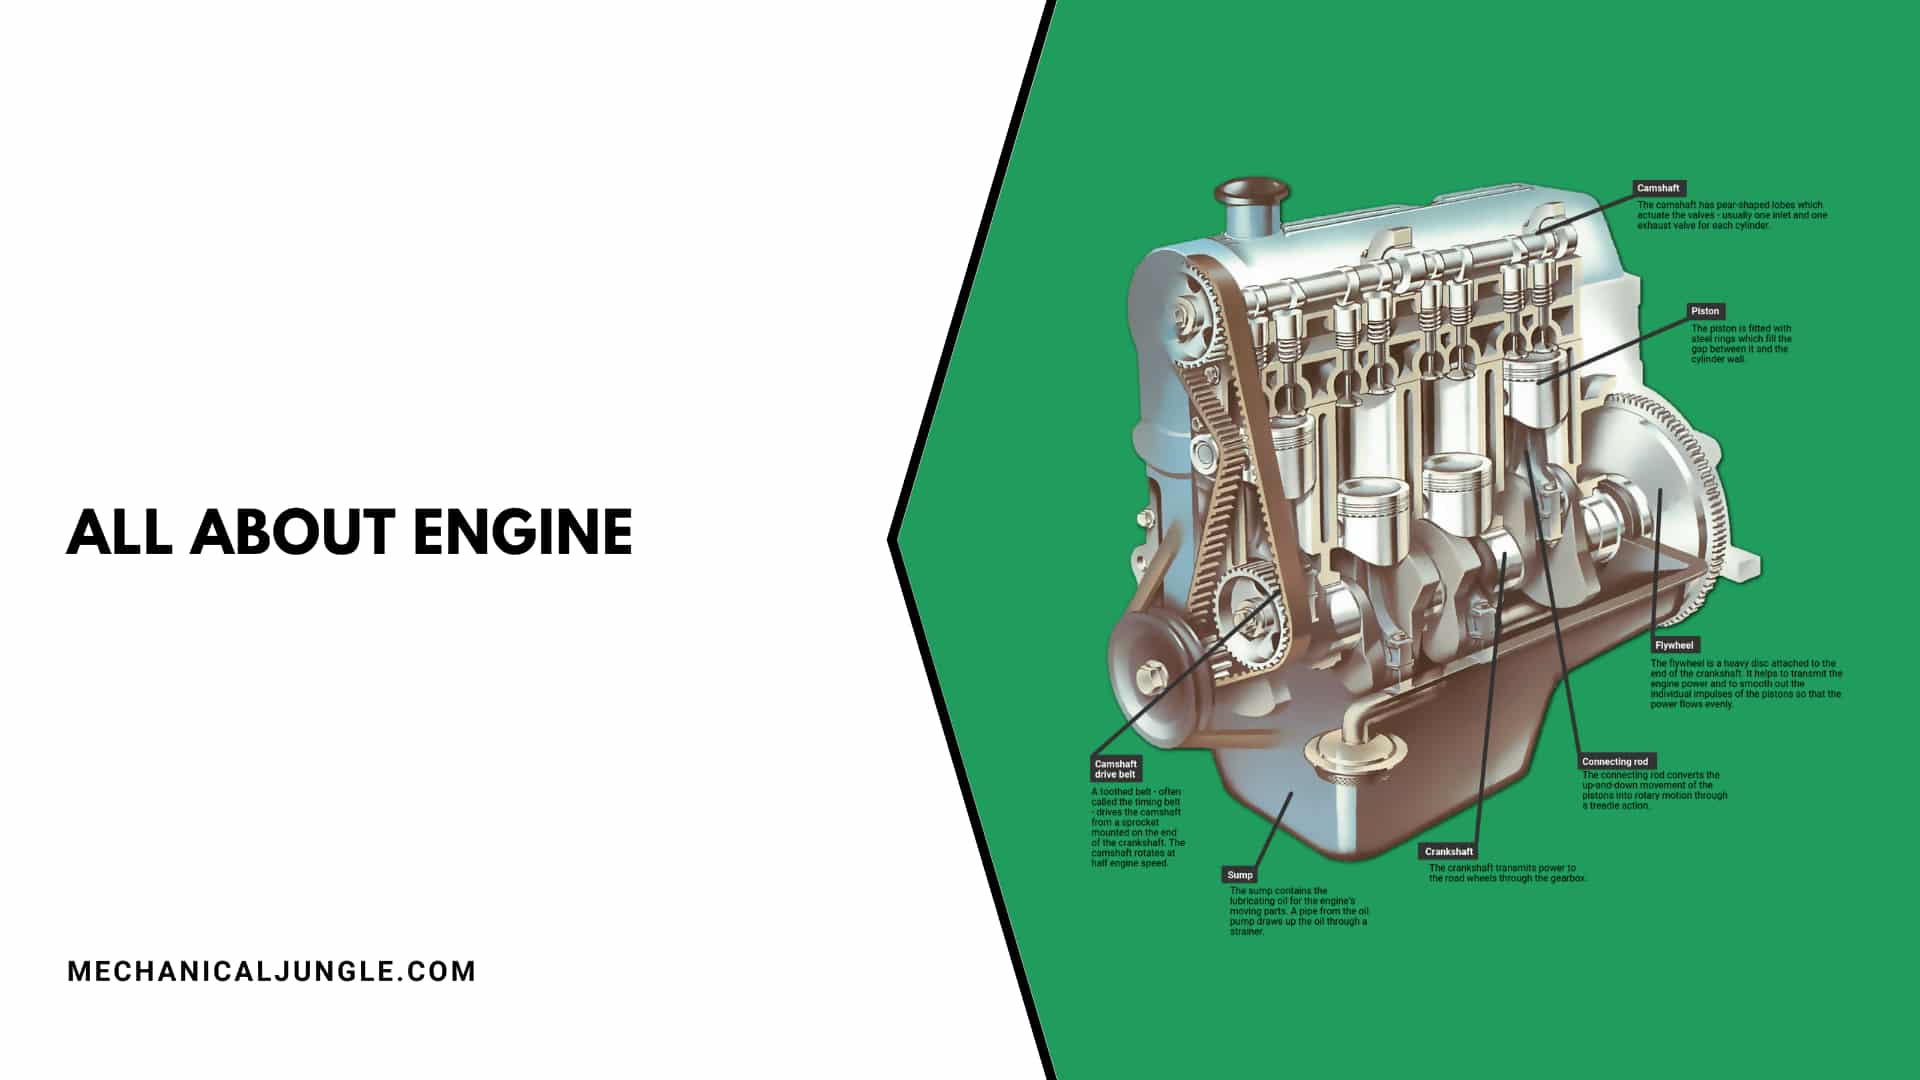 All About Engine